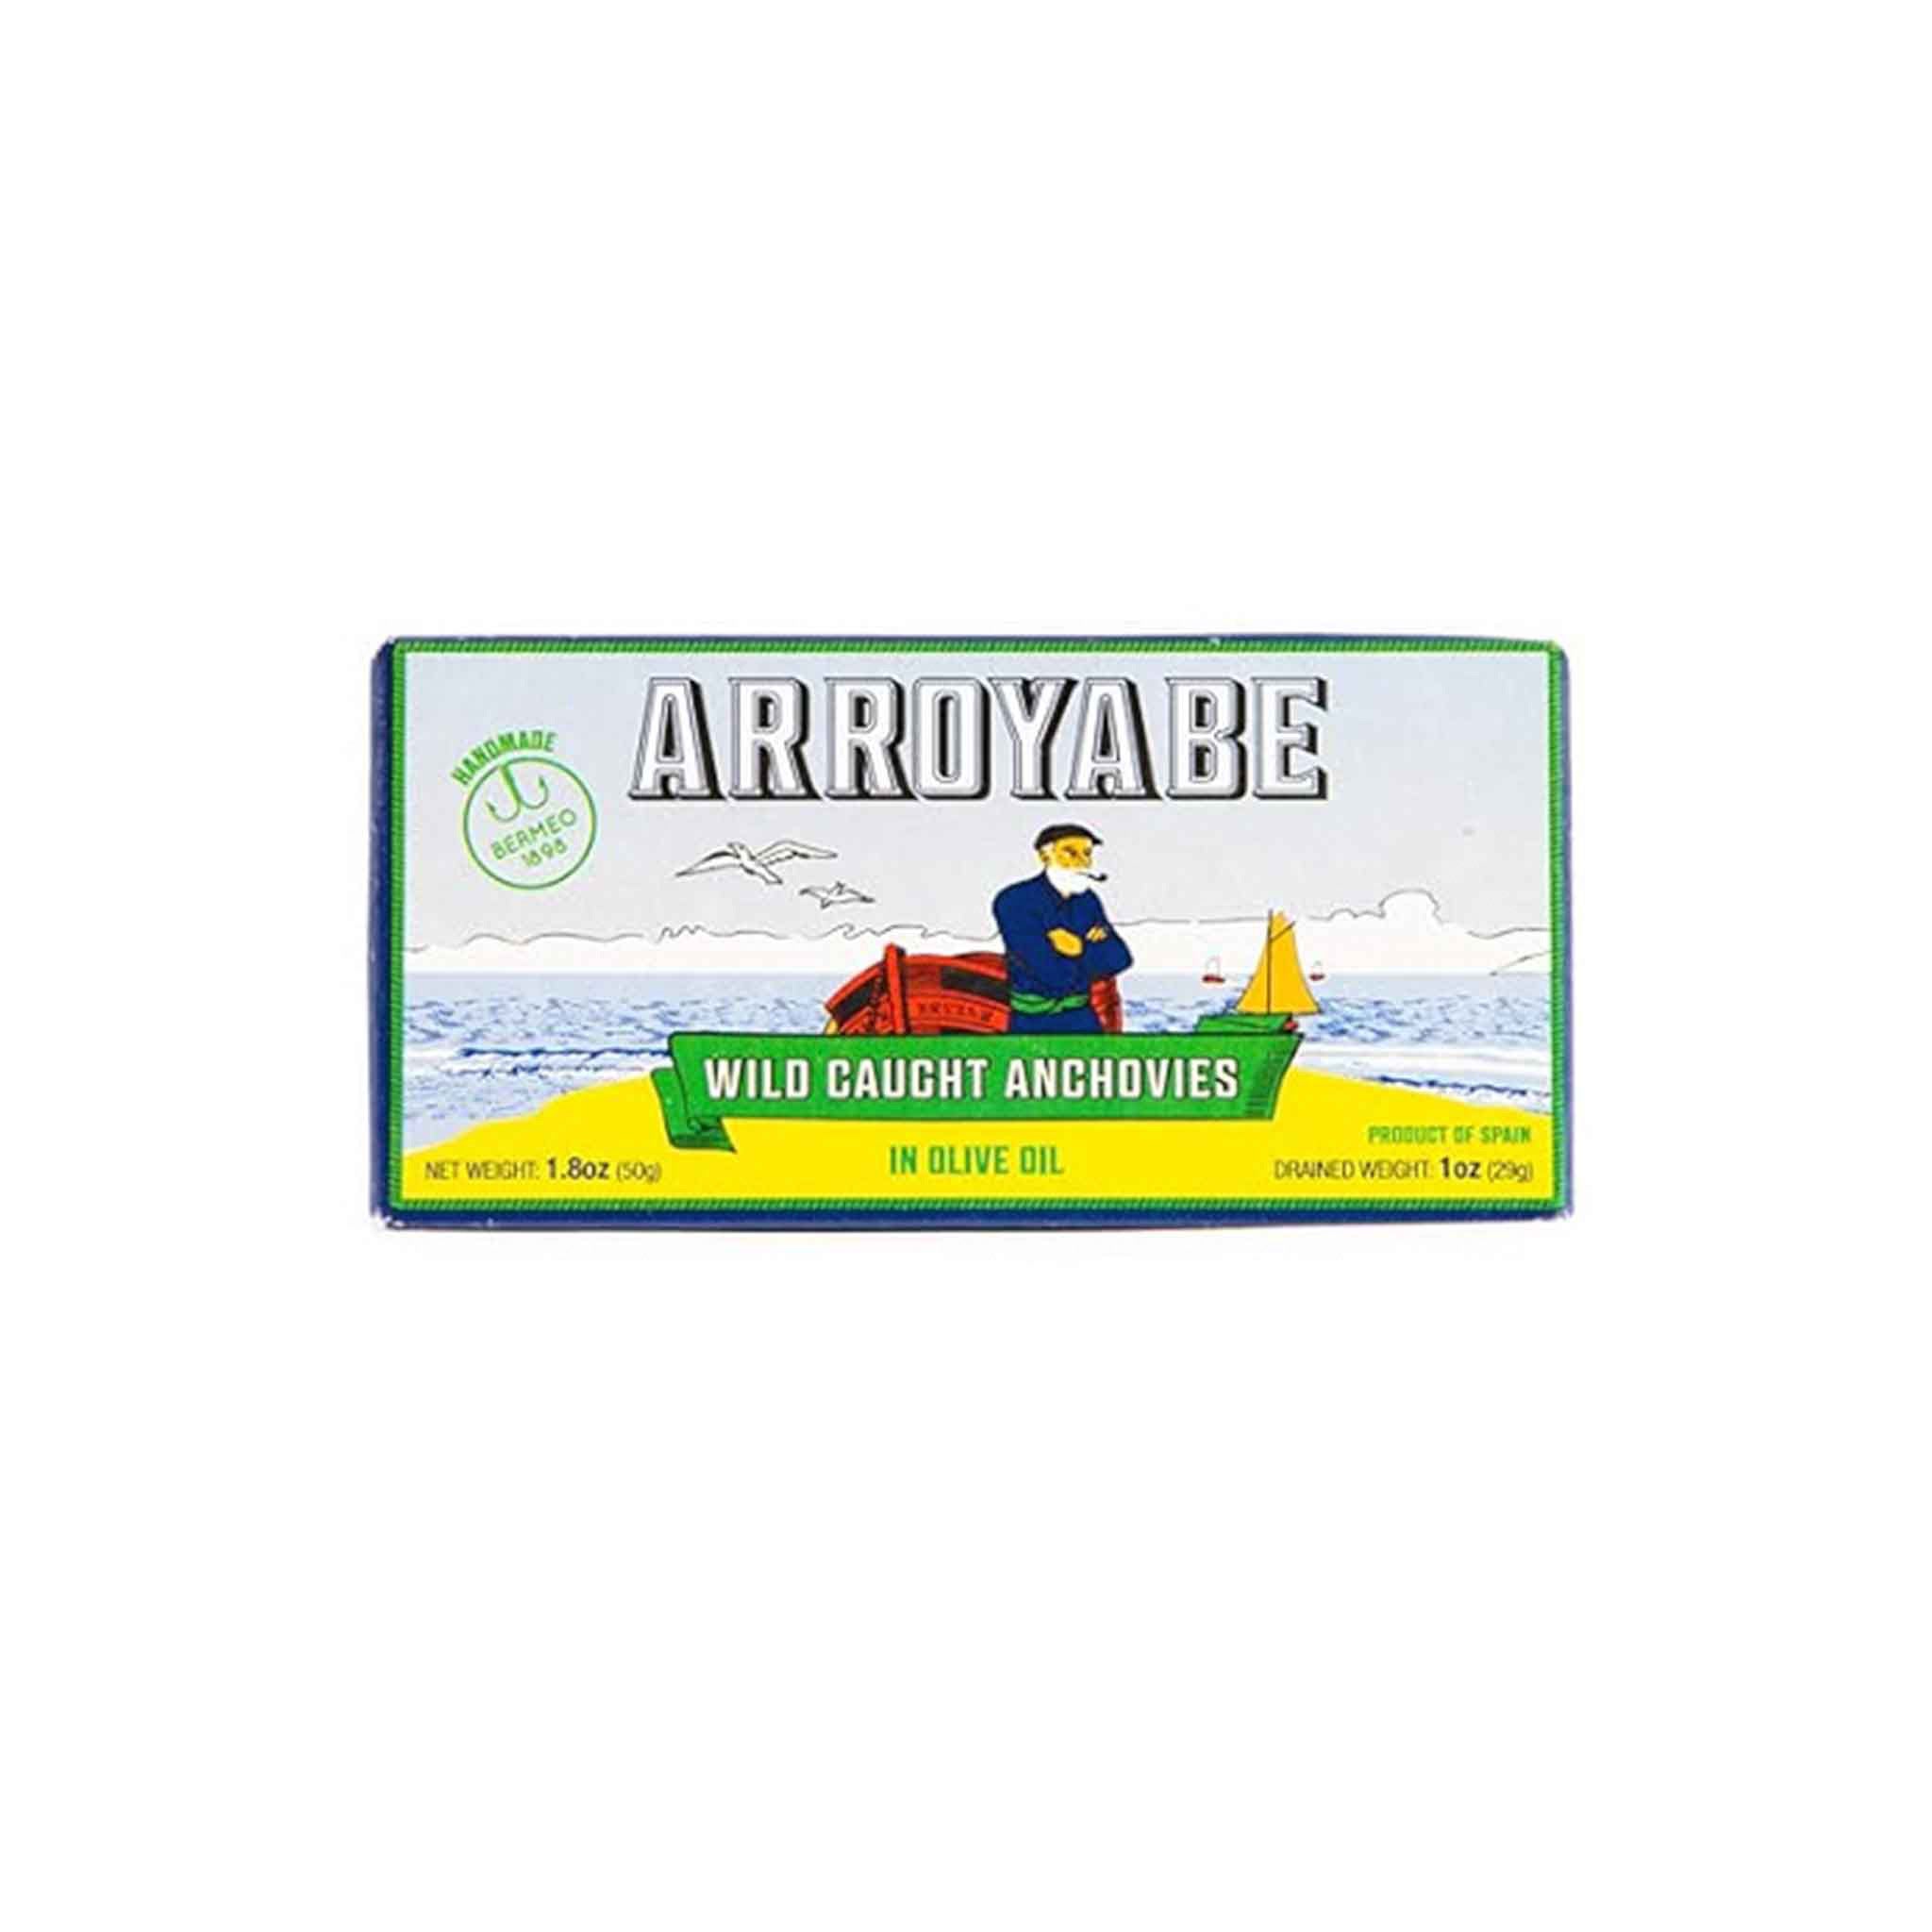 ARROYABE ANCHOVY FILLETS IN OLIVE OIL 49g